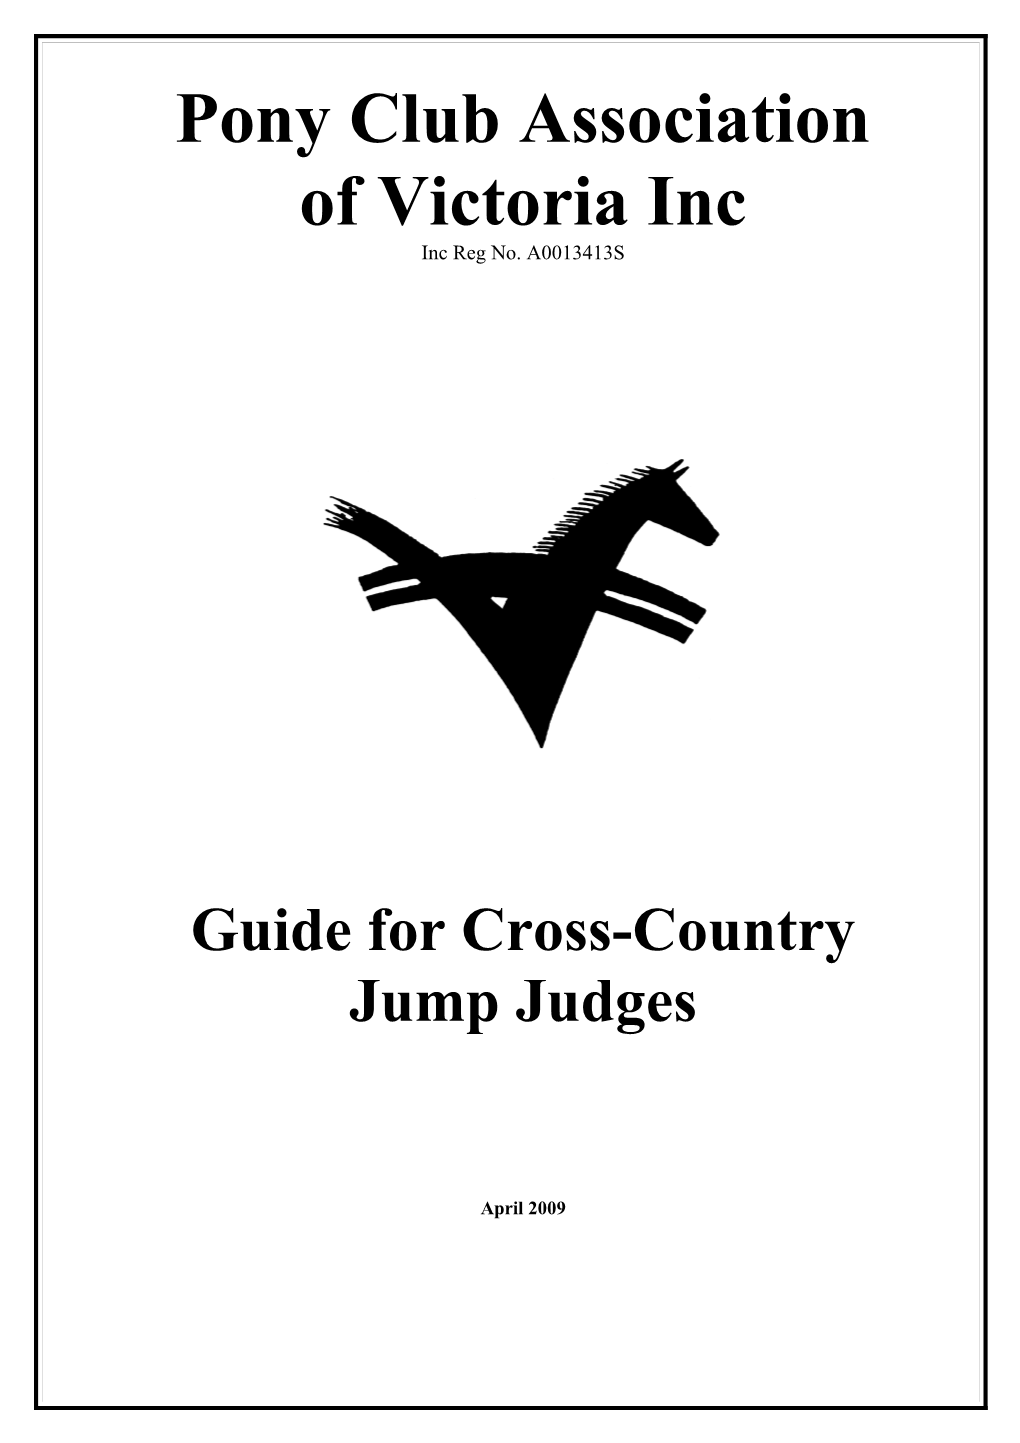 Guide for Cross-Country